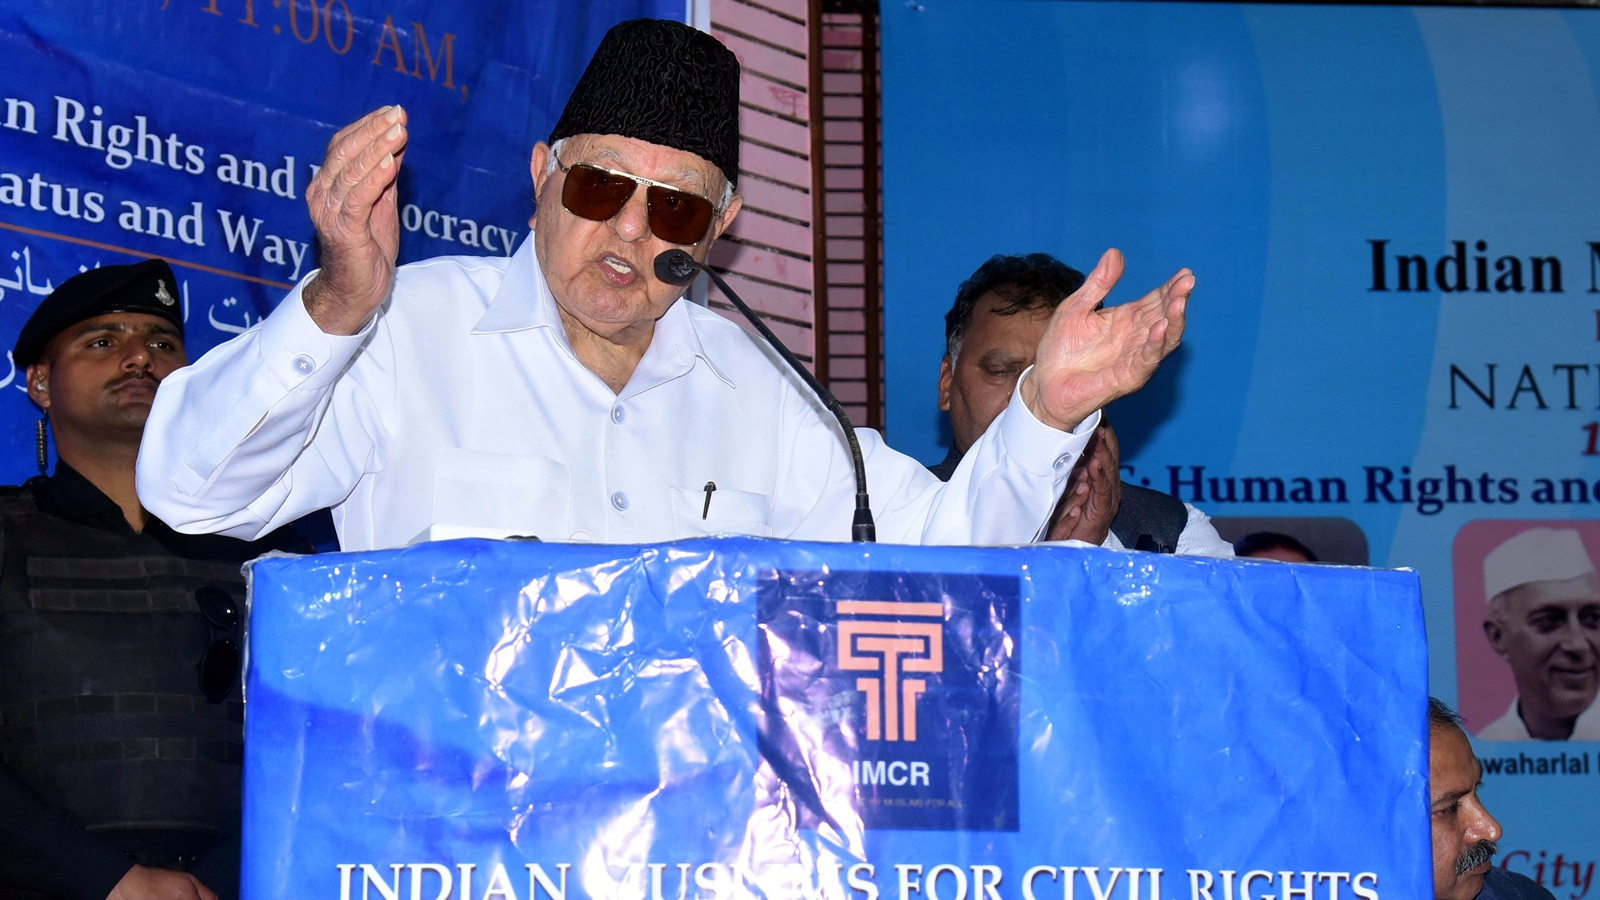 ‘Our religion does not tell us to look down at other religions’: Farooq Abdullah